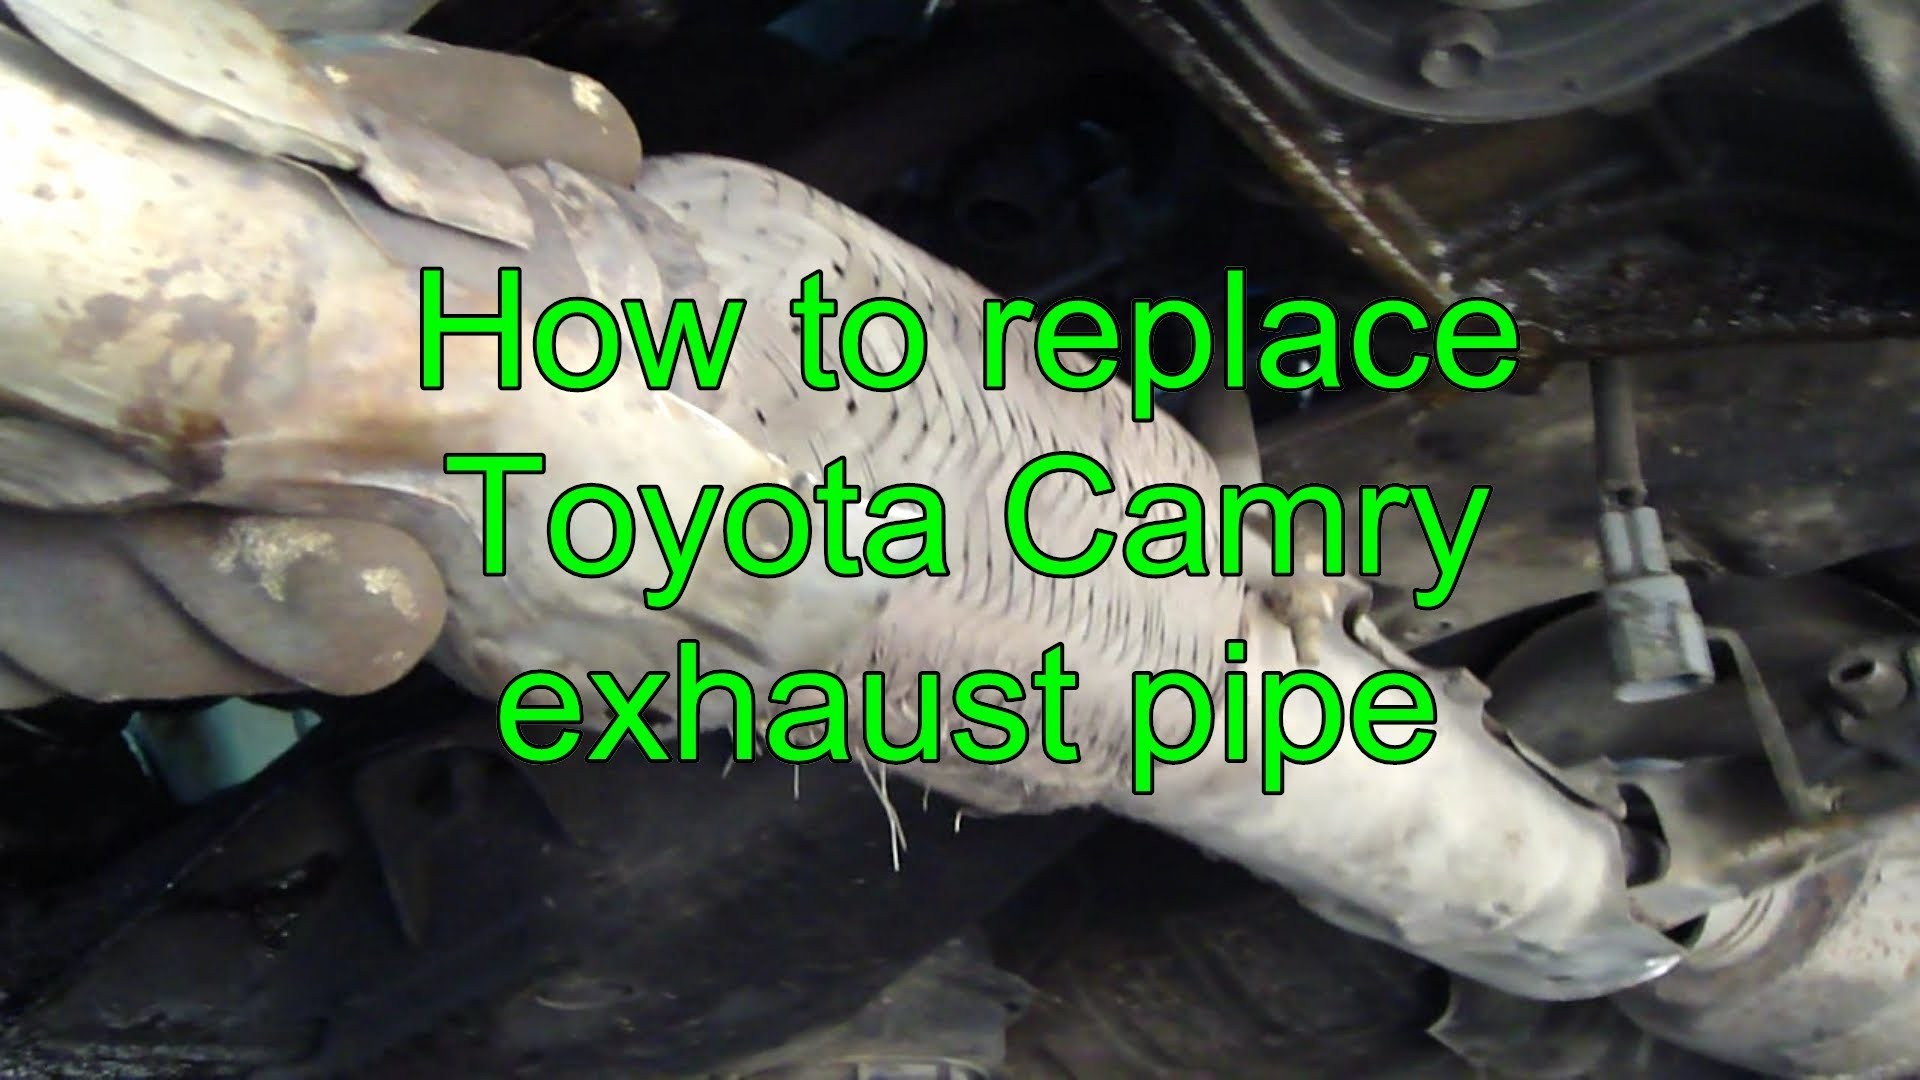 2000 toyota Camry Engine Diagram How to Replace toyota Camry Exhaust Pipe Years 1992 to 2002 Of 2000 toyota Camry Engine Diagram